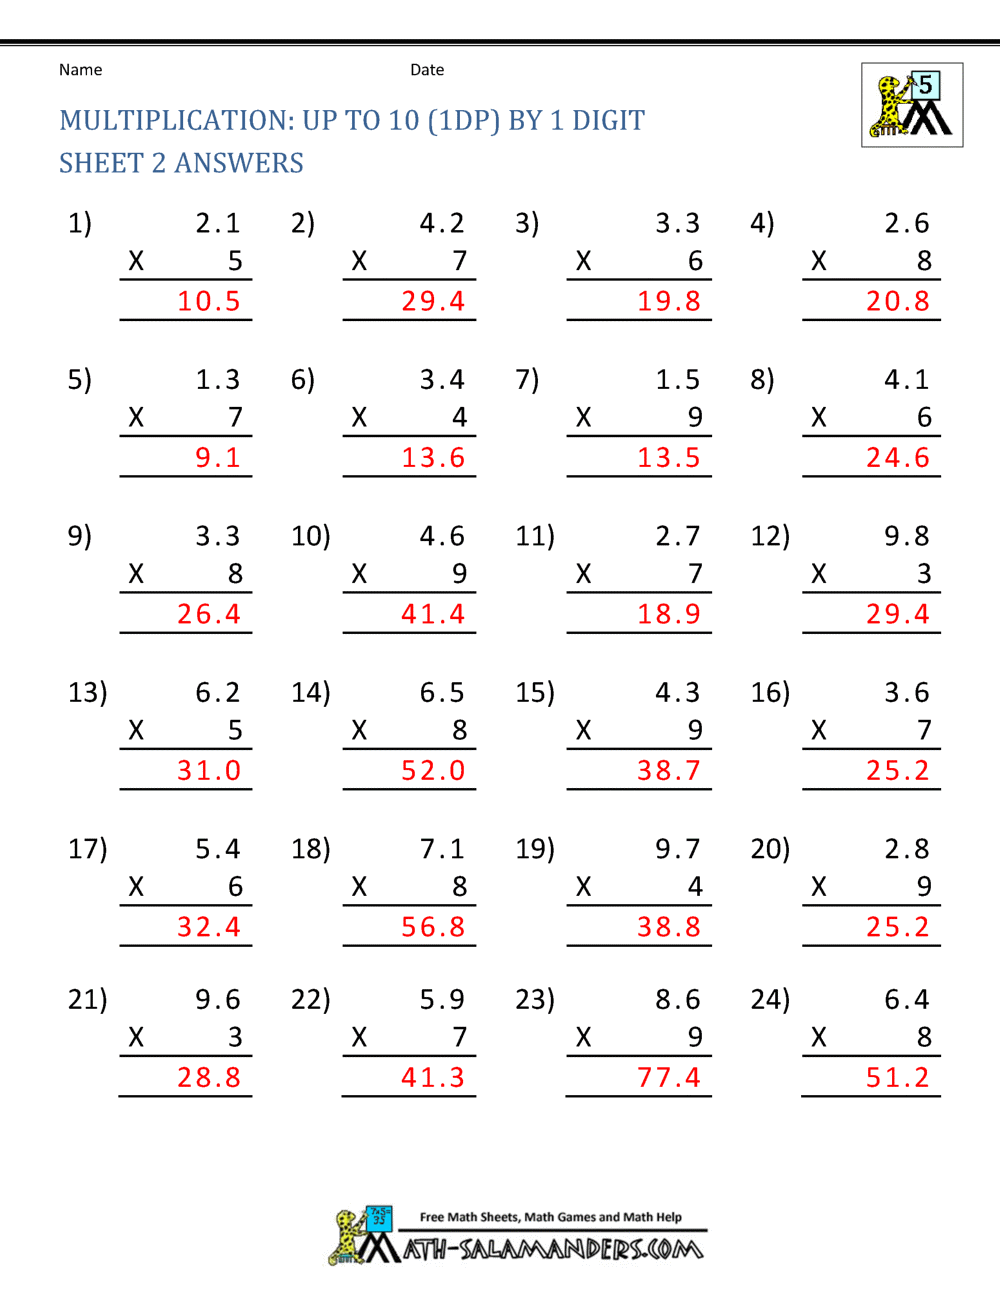 Double Cross Math Worksheet Answers